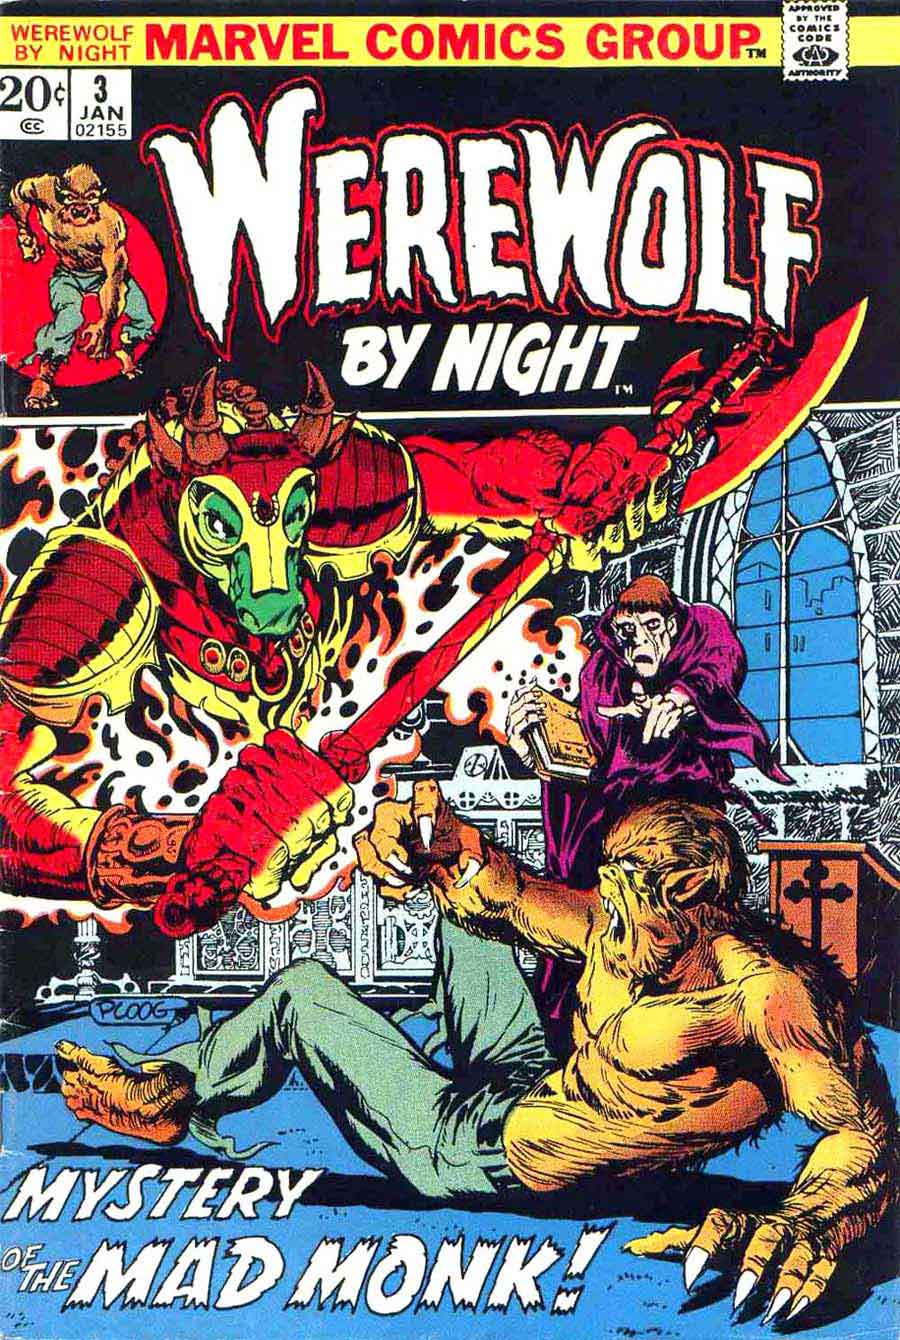 Werewolf by Night v1 #3 1970s marvel comic book cover art by Mike Ploog